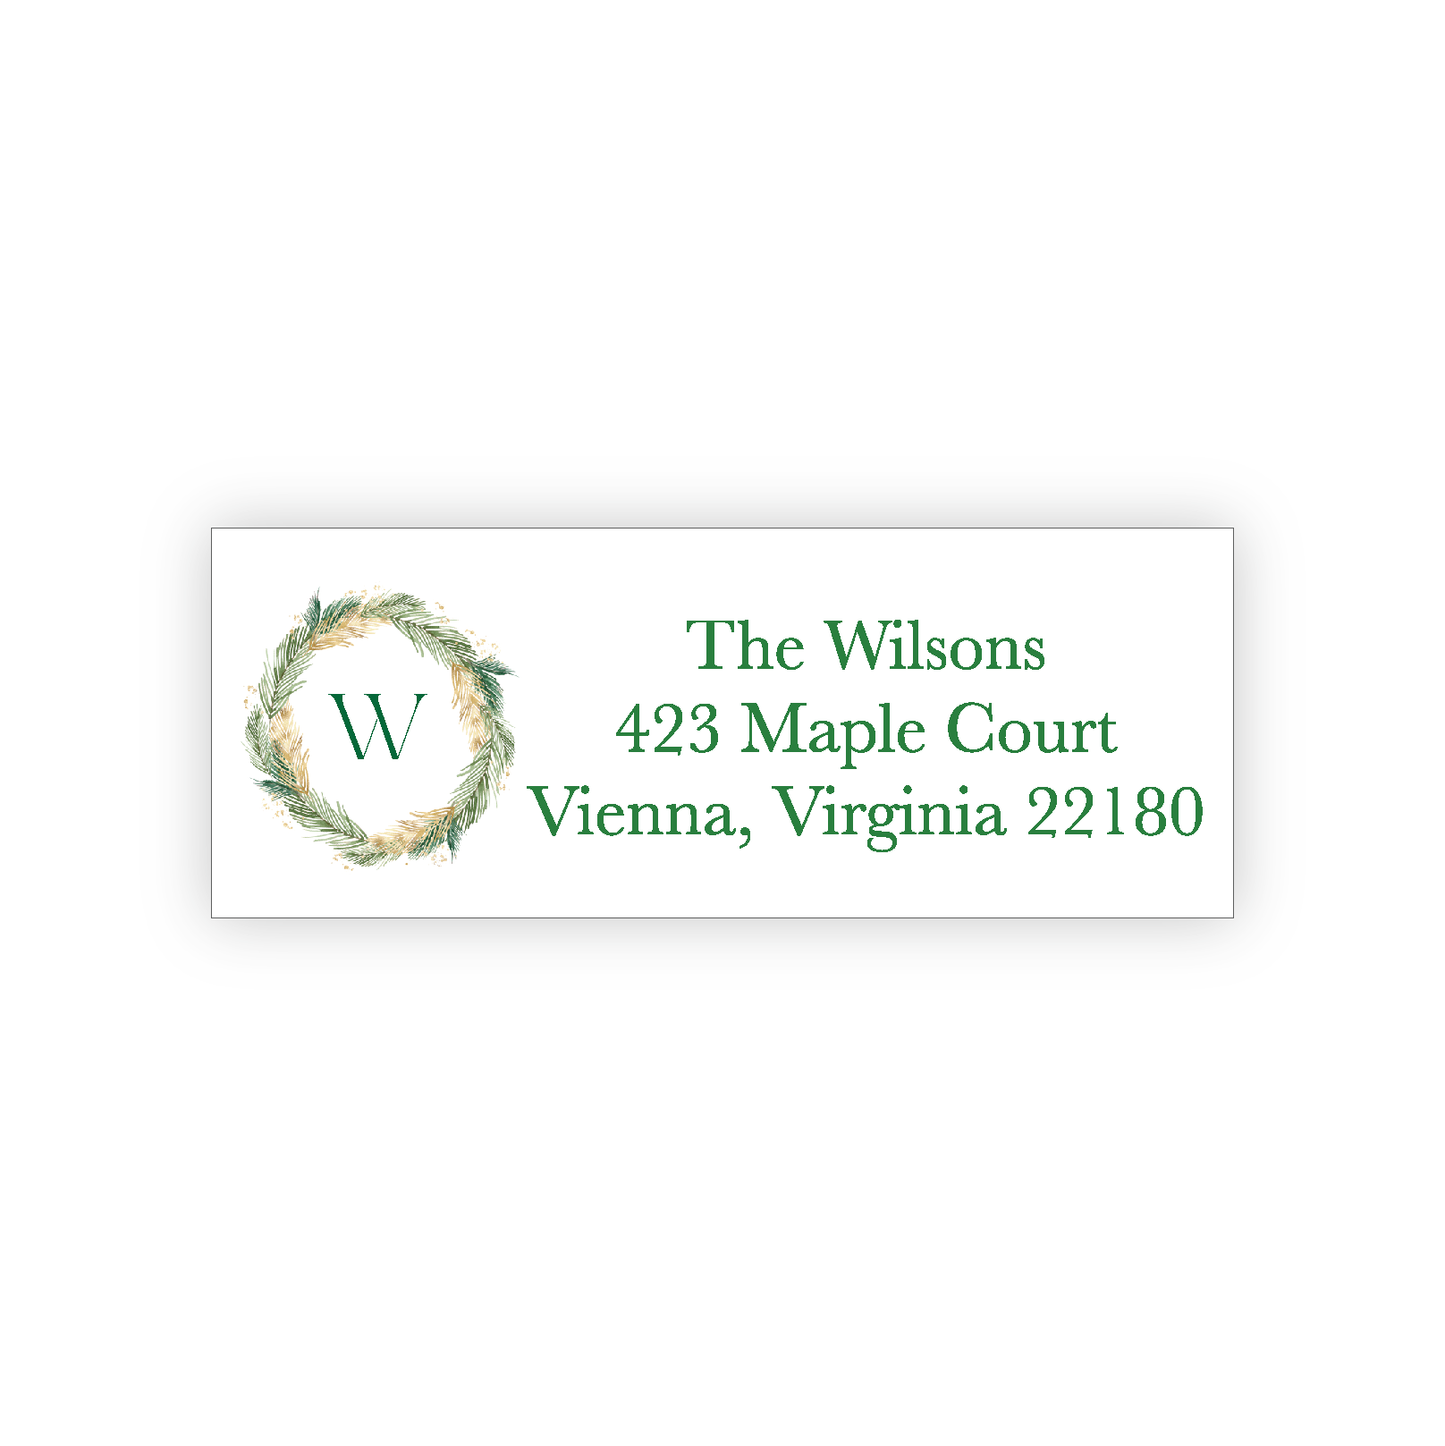 Holiday Address Label    |    Green and Gold Wreath